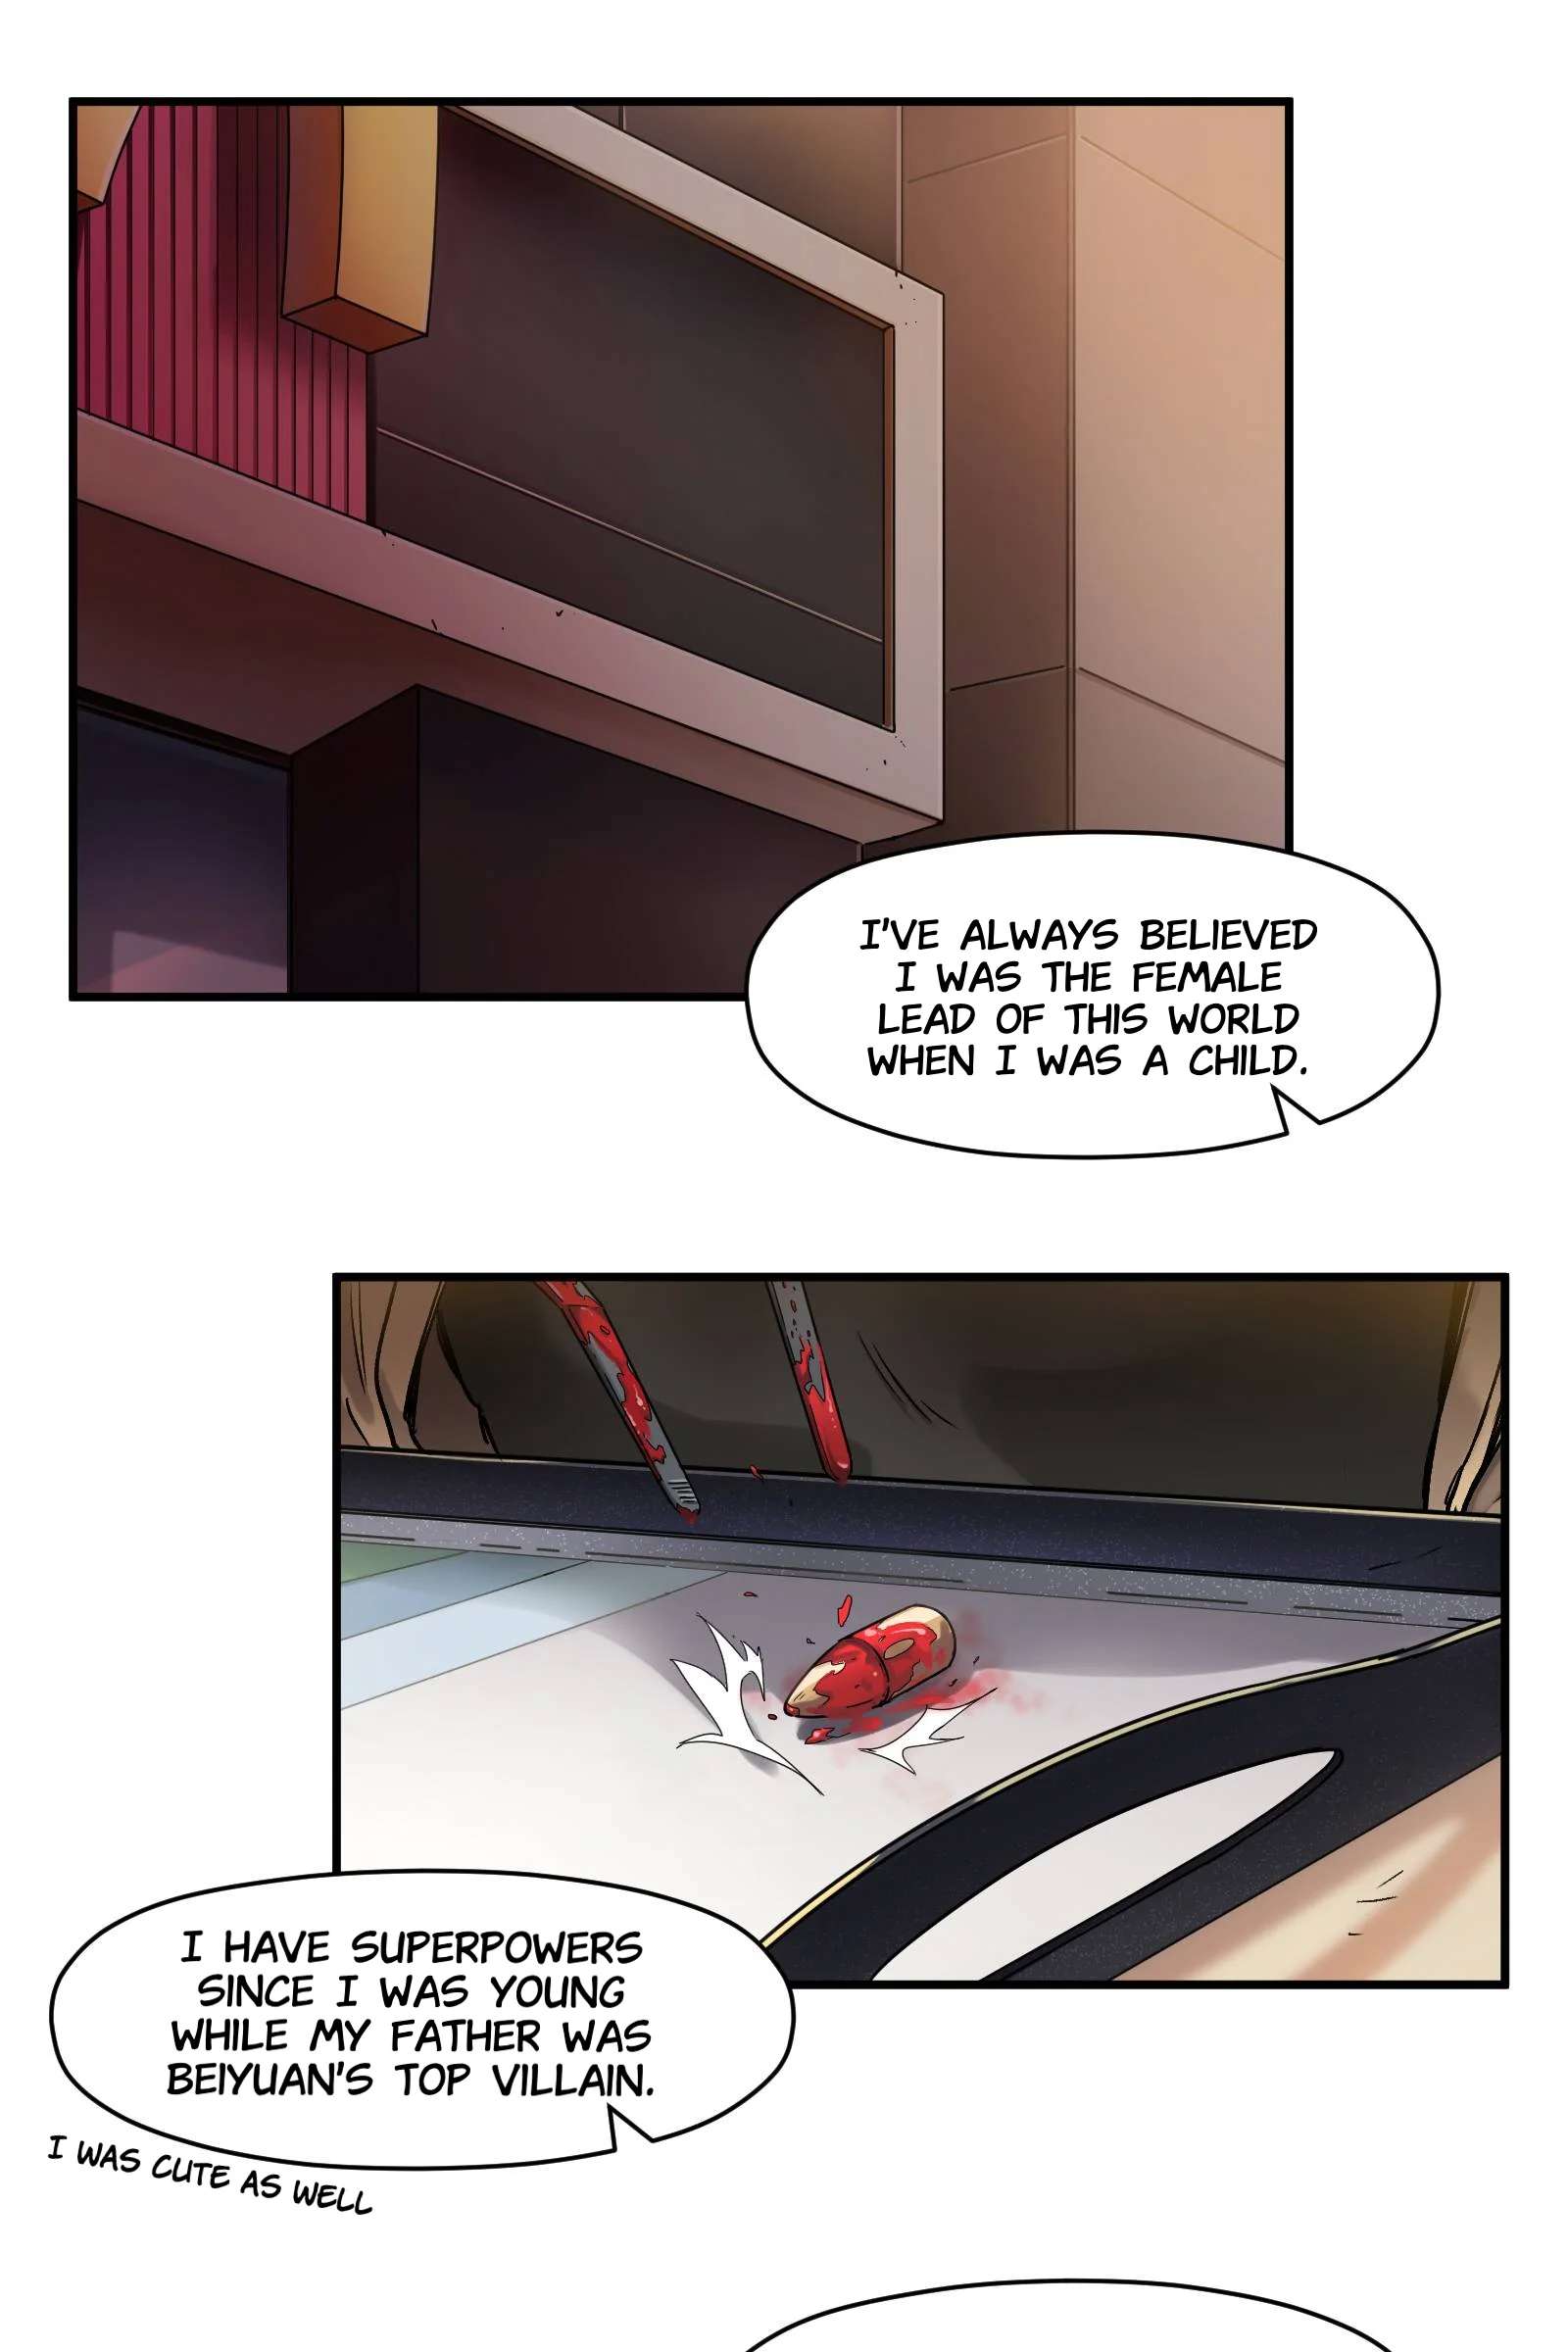 The Reversal - Page 1